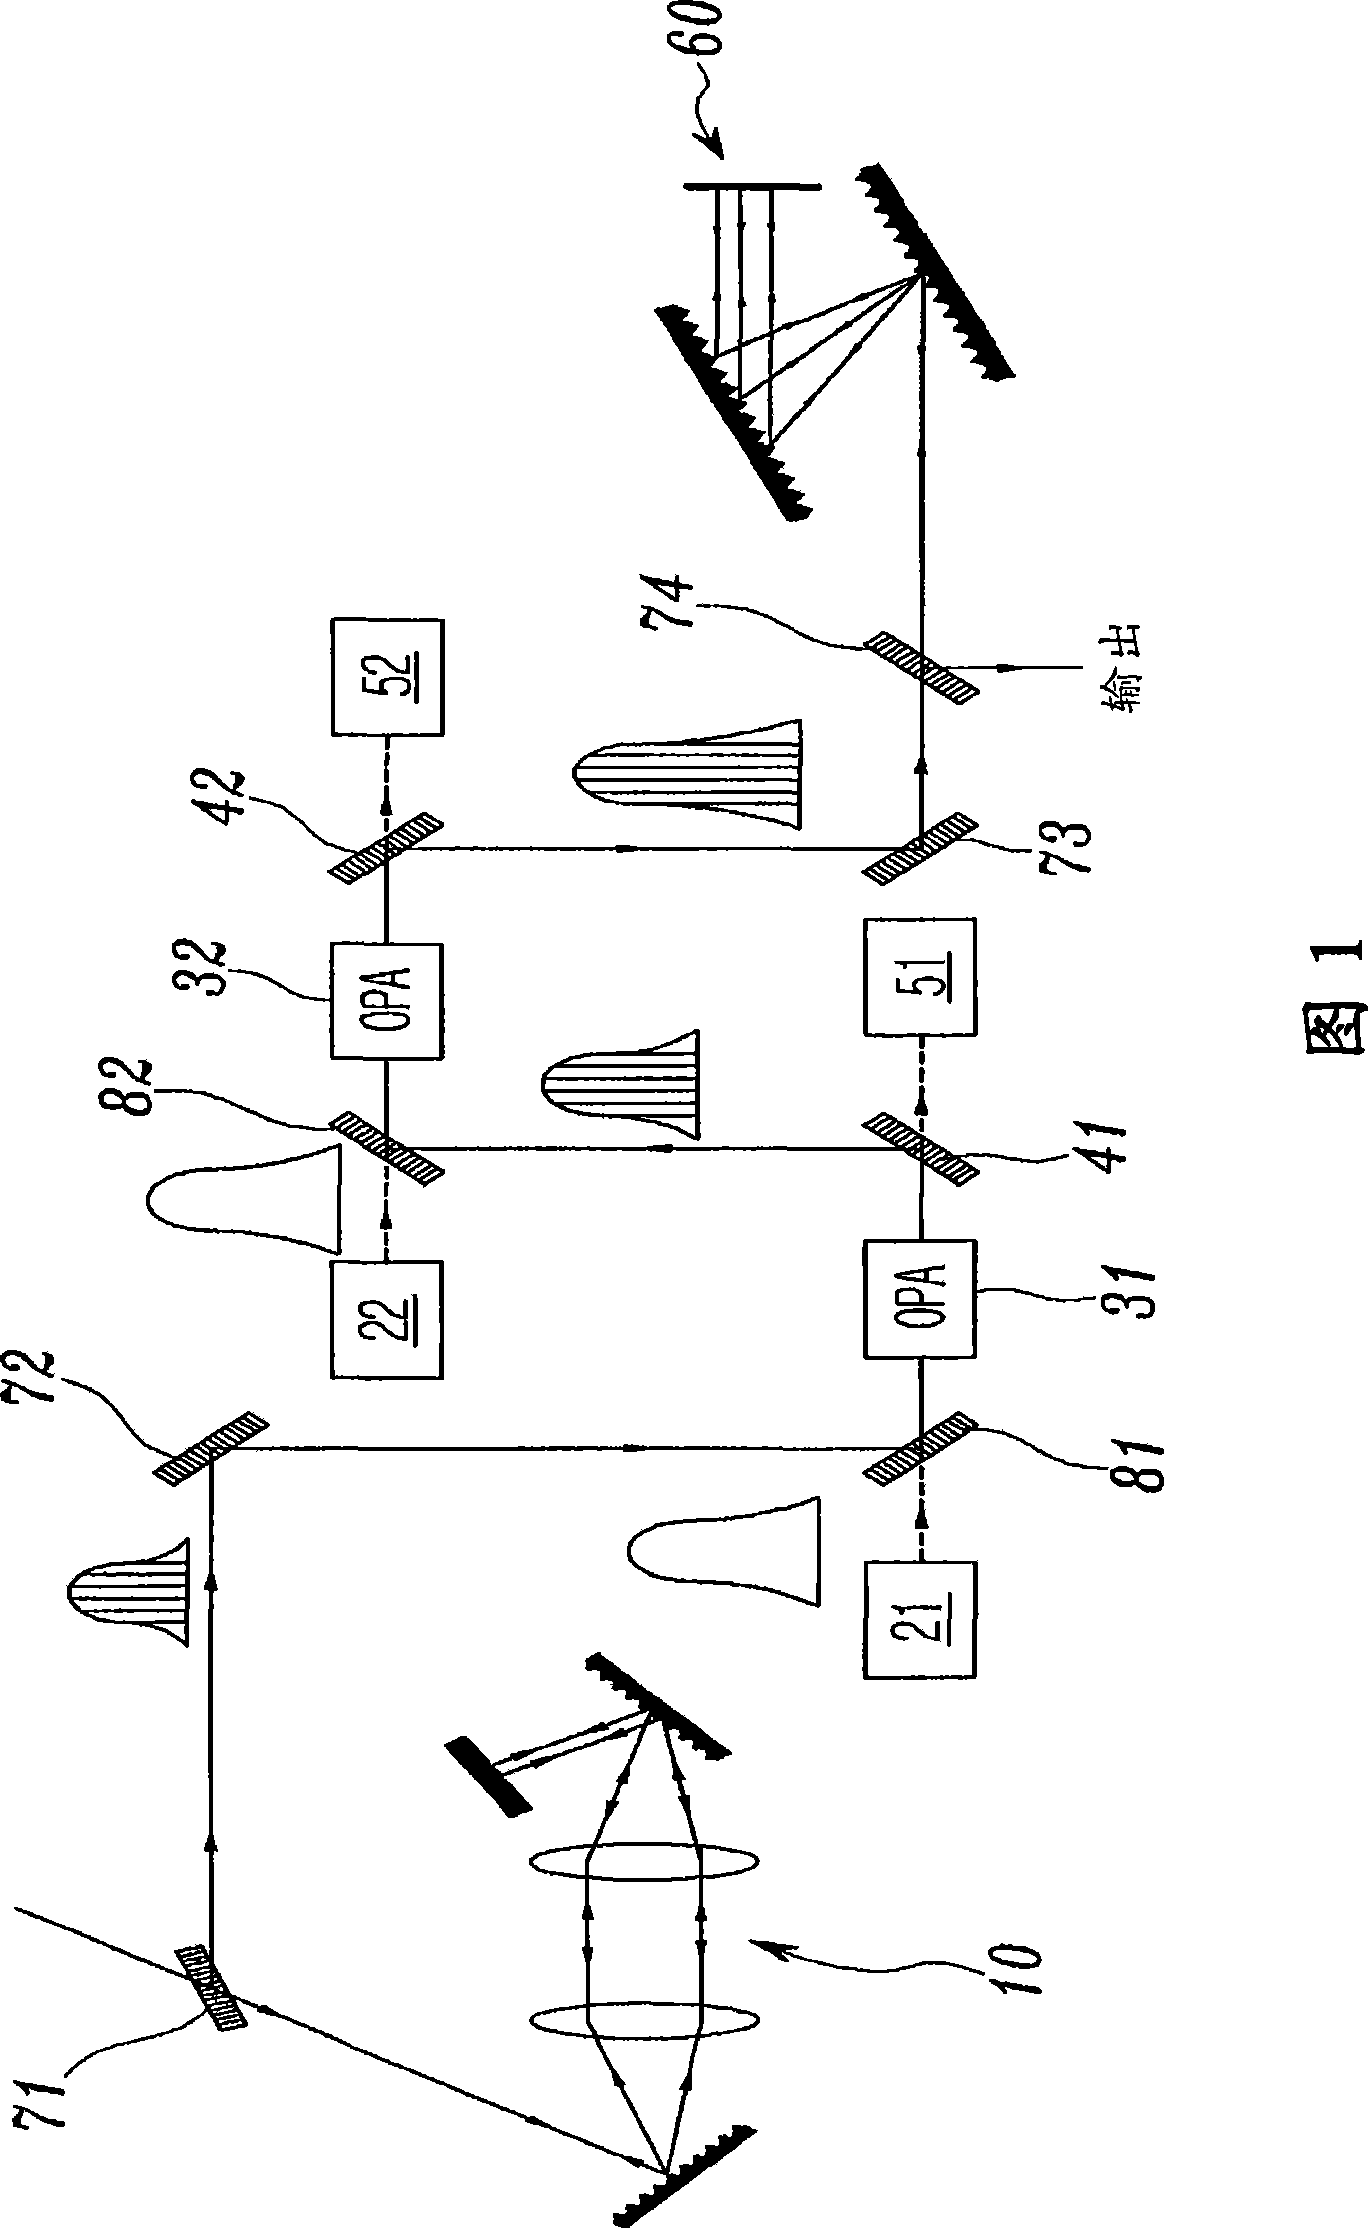 Apparatus for optical parametric chirped pulse amplification (opcpa) using inverse chirping and idler